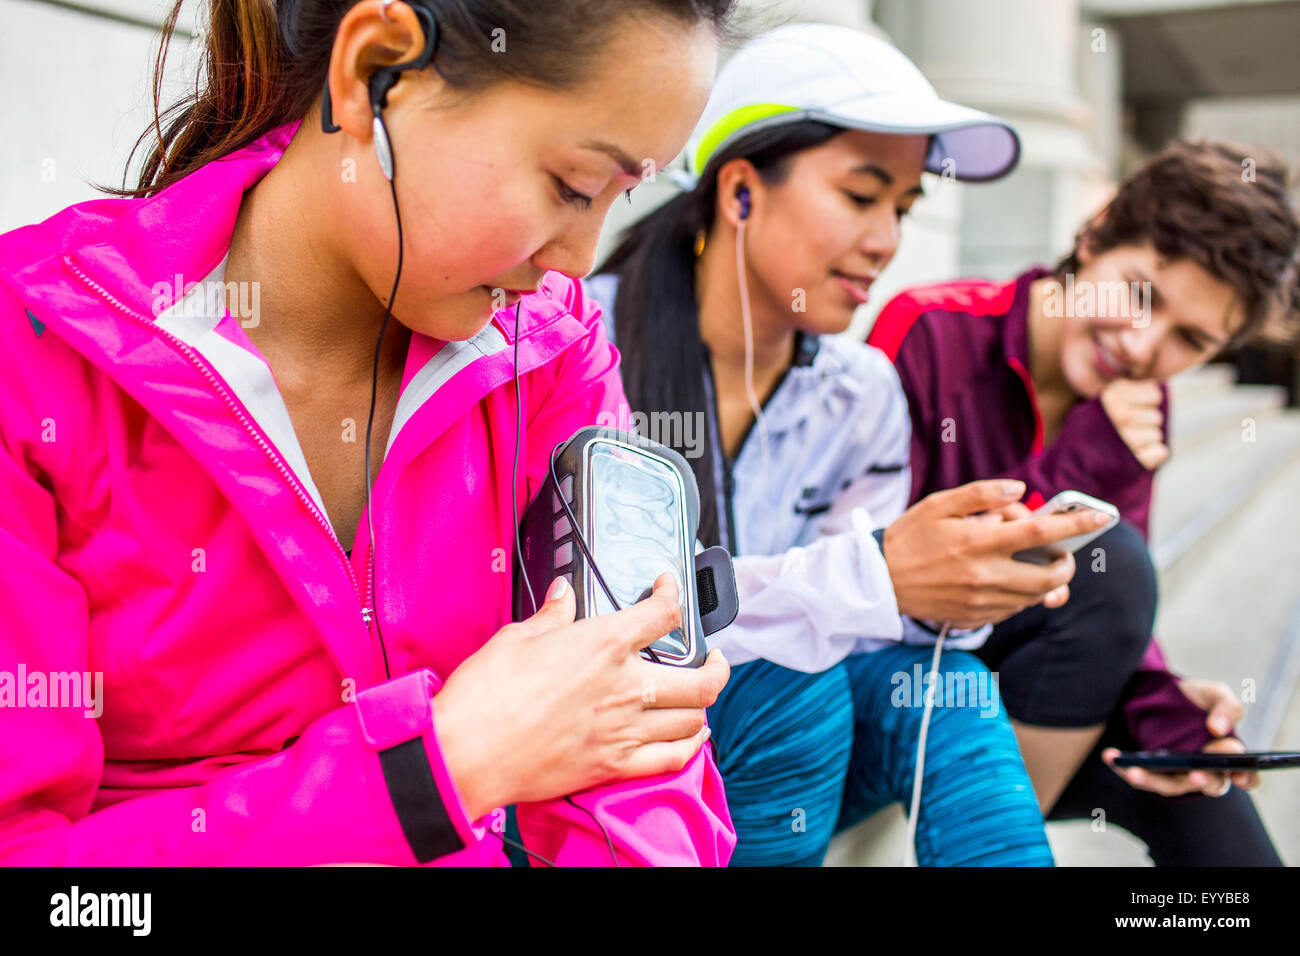 Runners using cell phones and earbud on city sidewalk Stock Photo